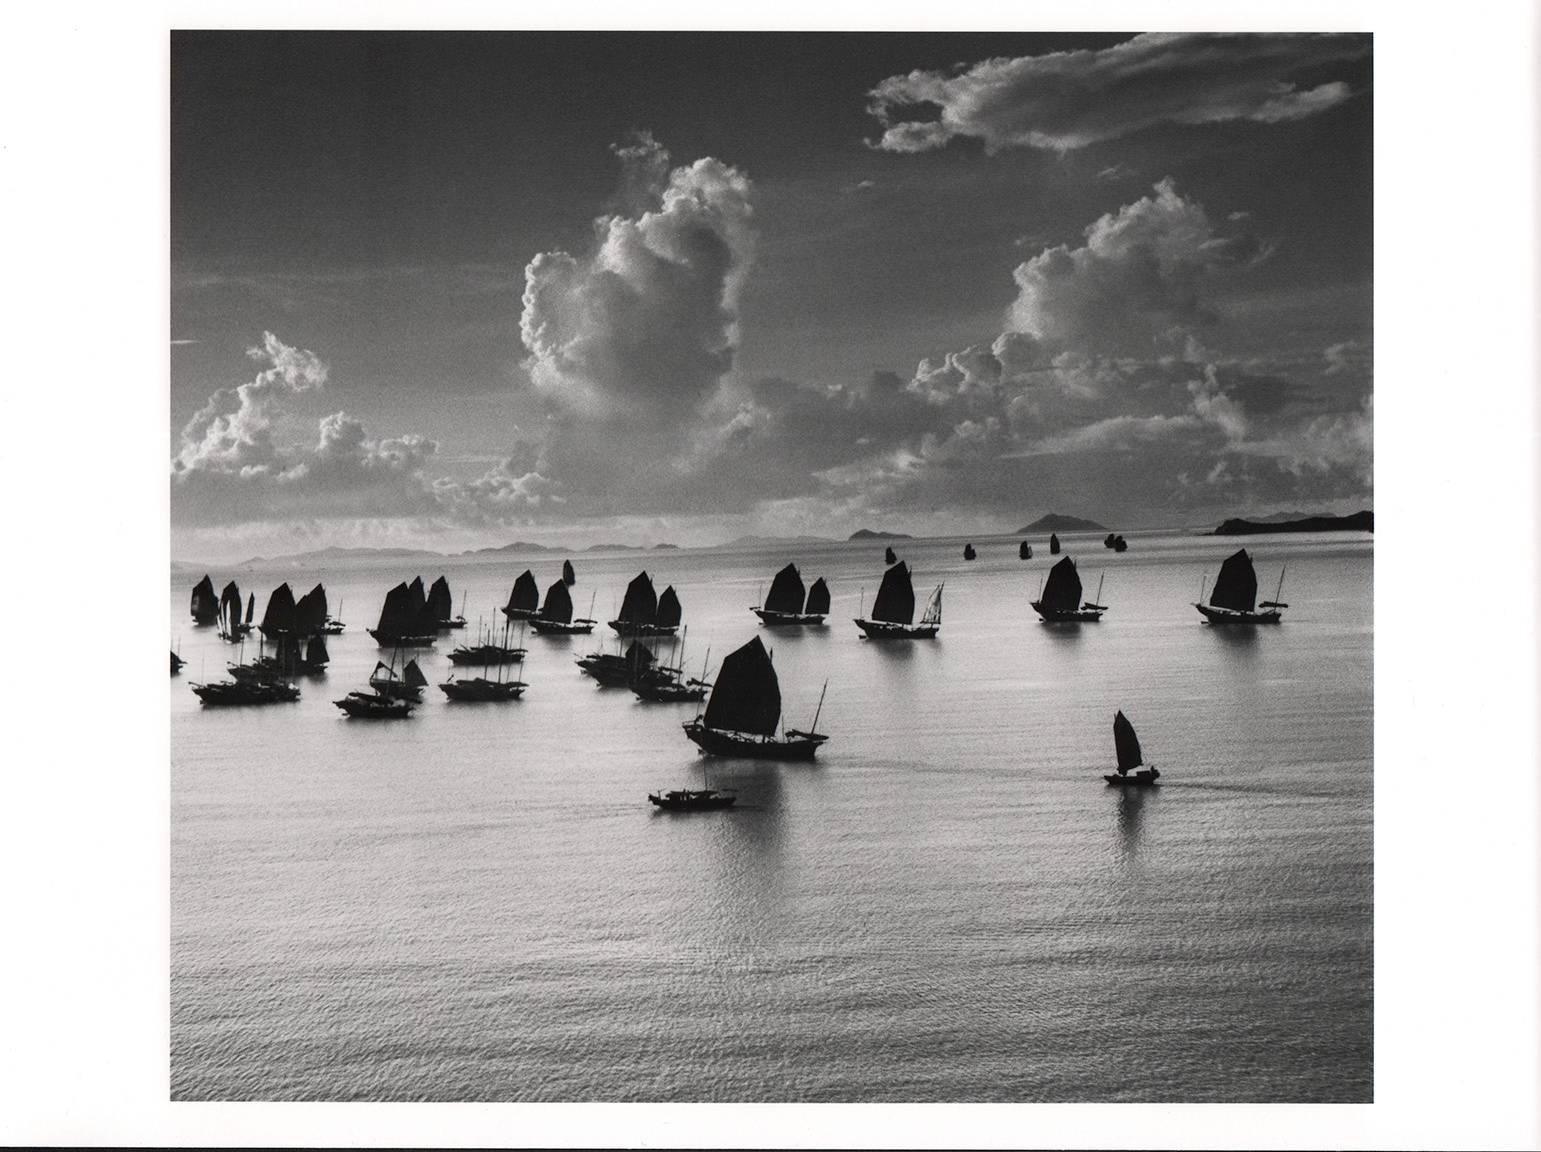 Harbour of Kowloon, Hong Kong, 1952 - Photograph by Werner Bischof